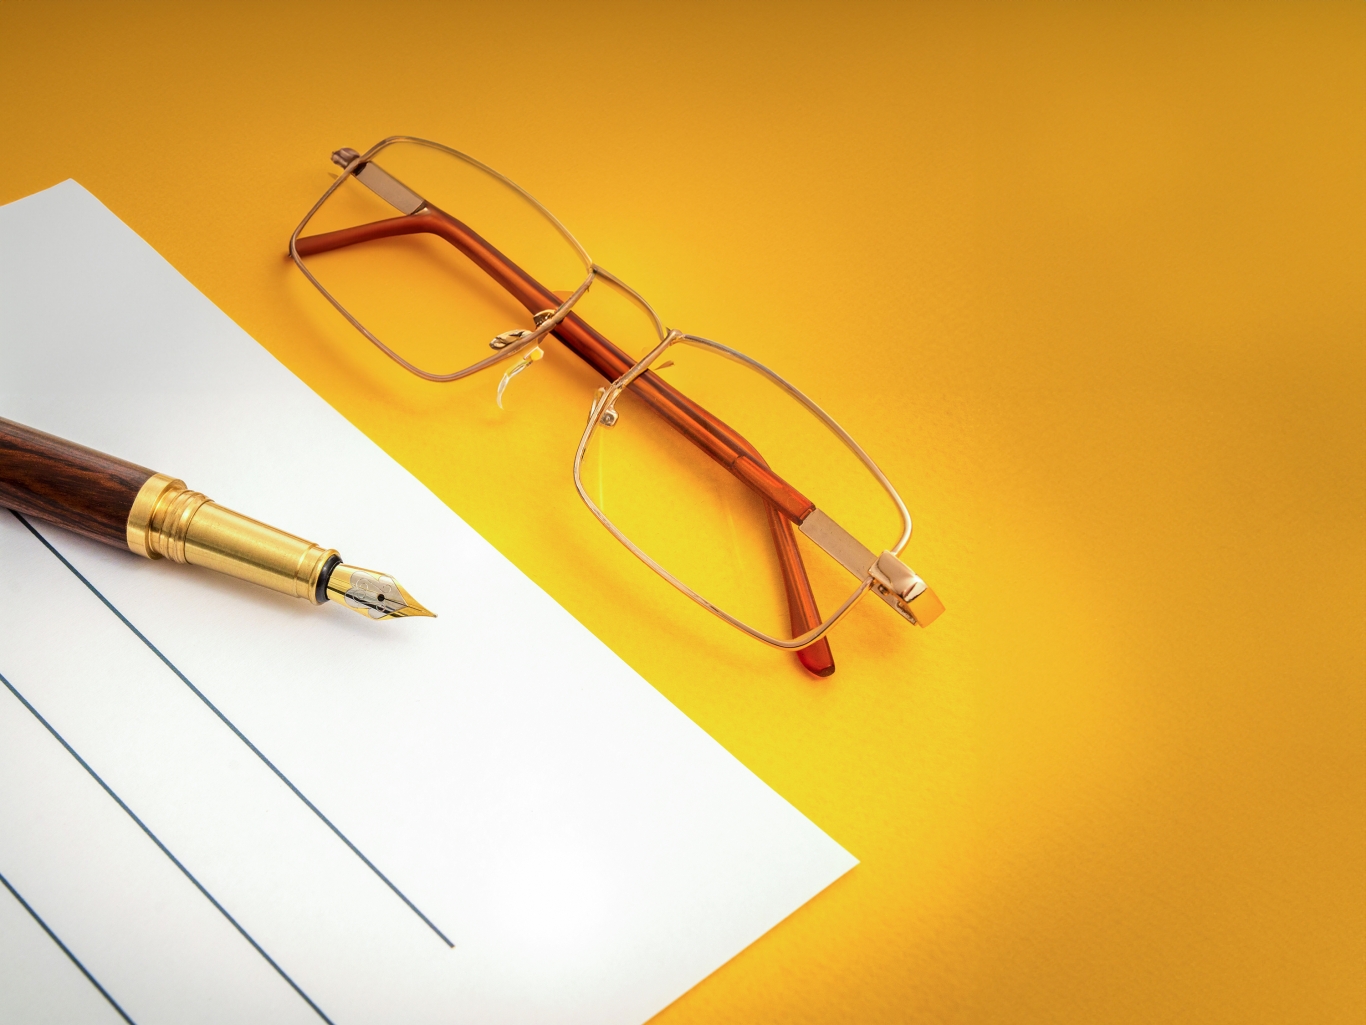 Law office still life with a pen, piece of paper and some glasses on a yellow background.